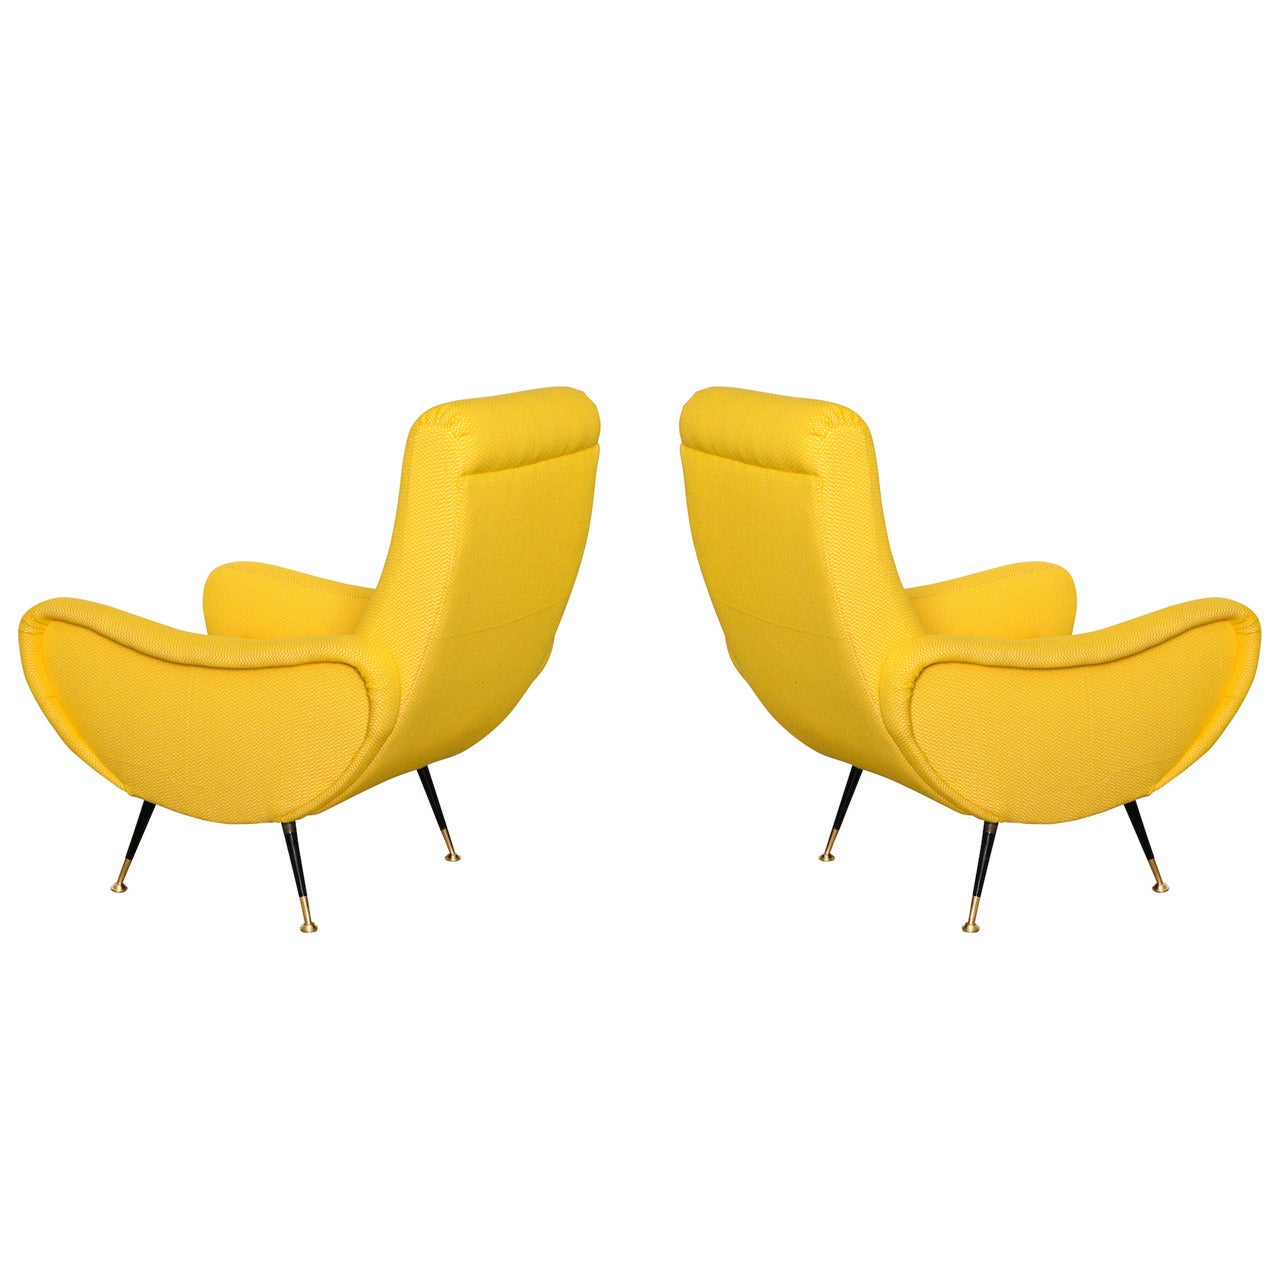 Pair of Sculptural Lounge Chairs